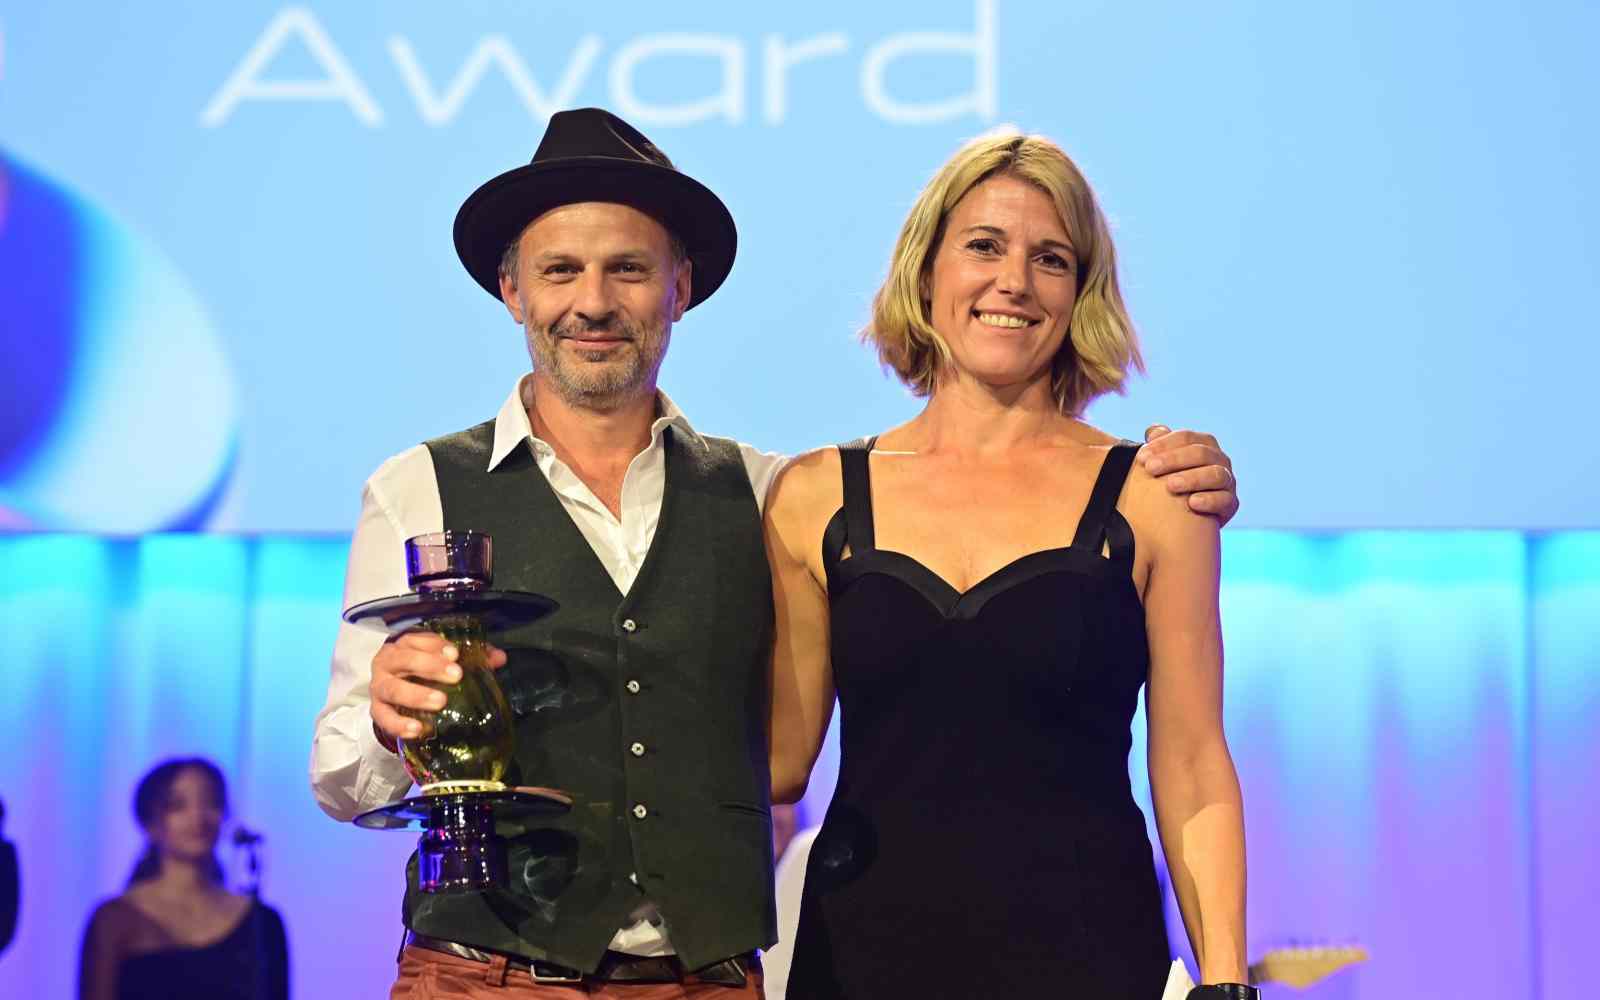 Fellow Jonas Staub posing with presenter and holding a trophy at award ceremony